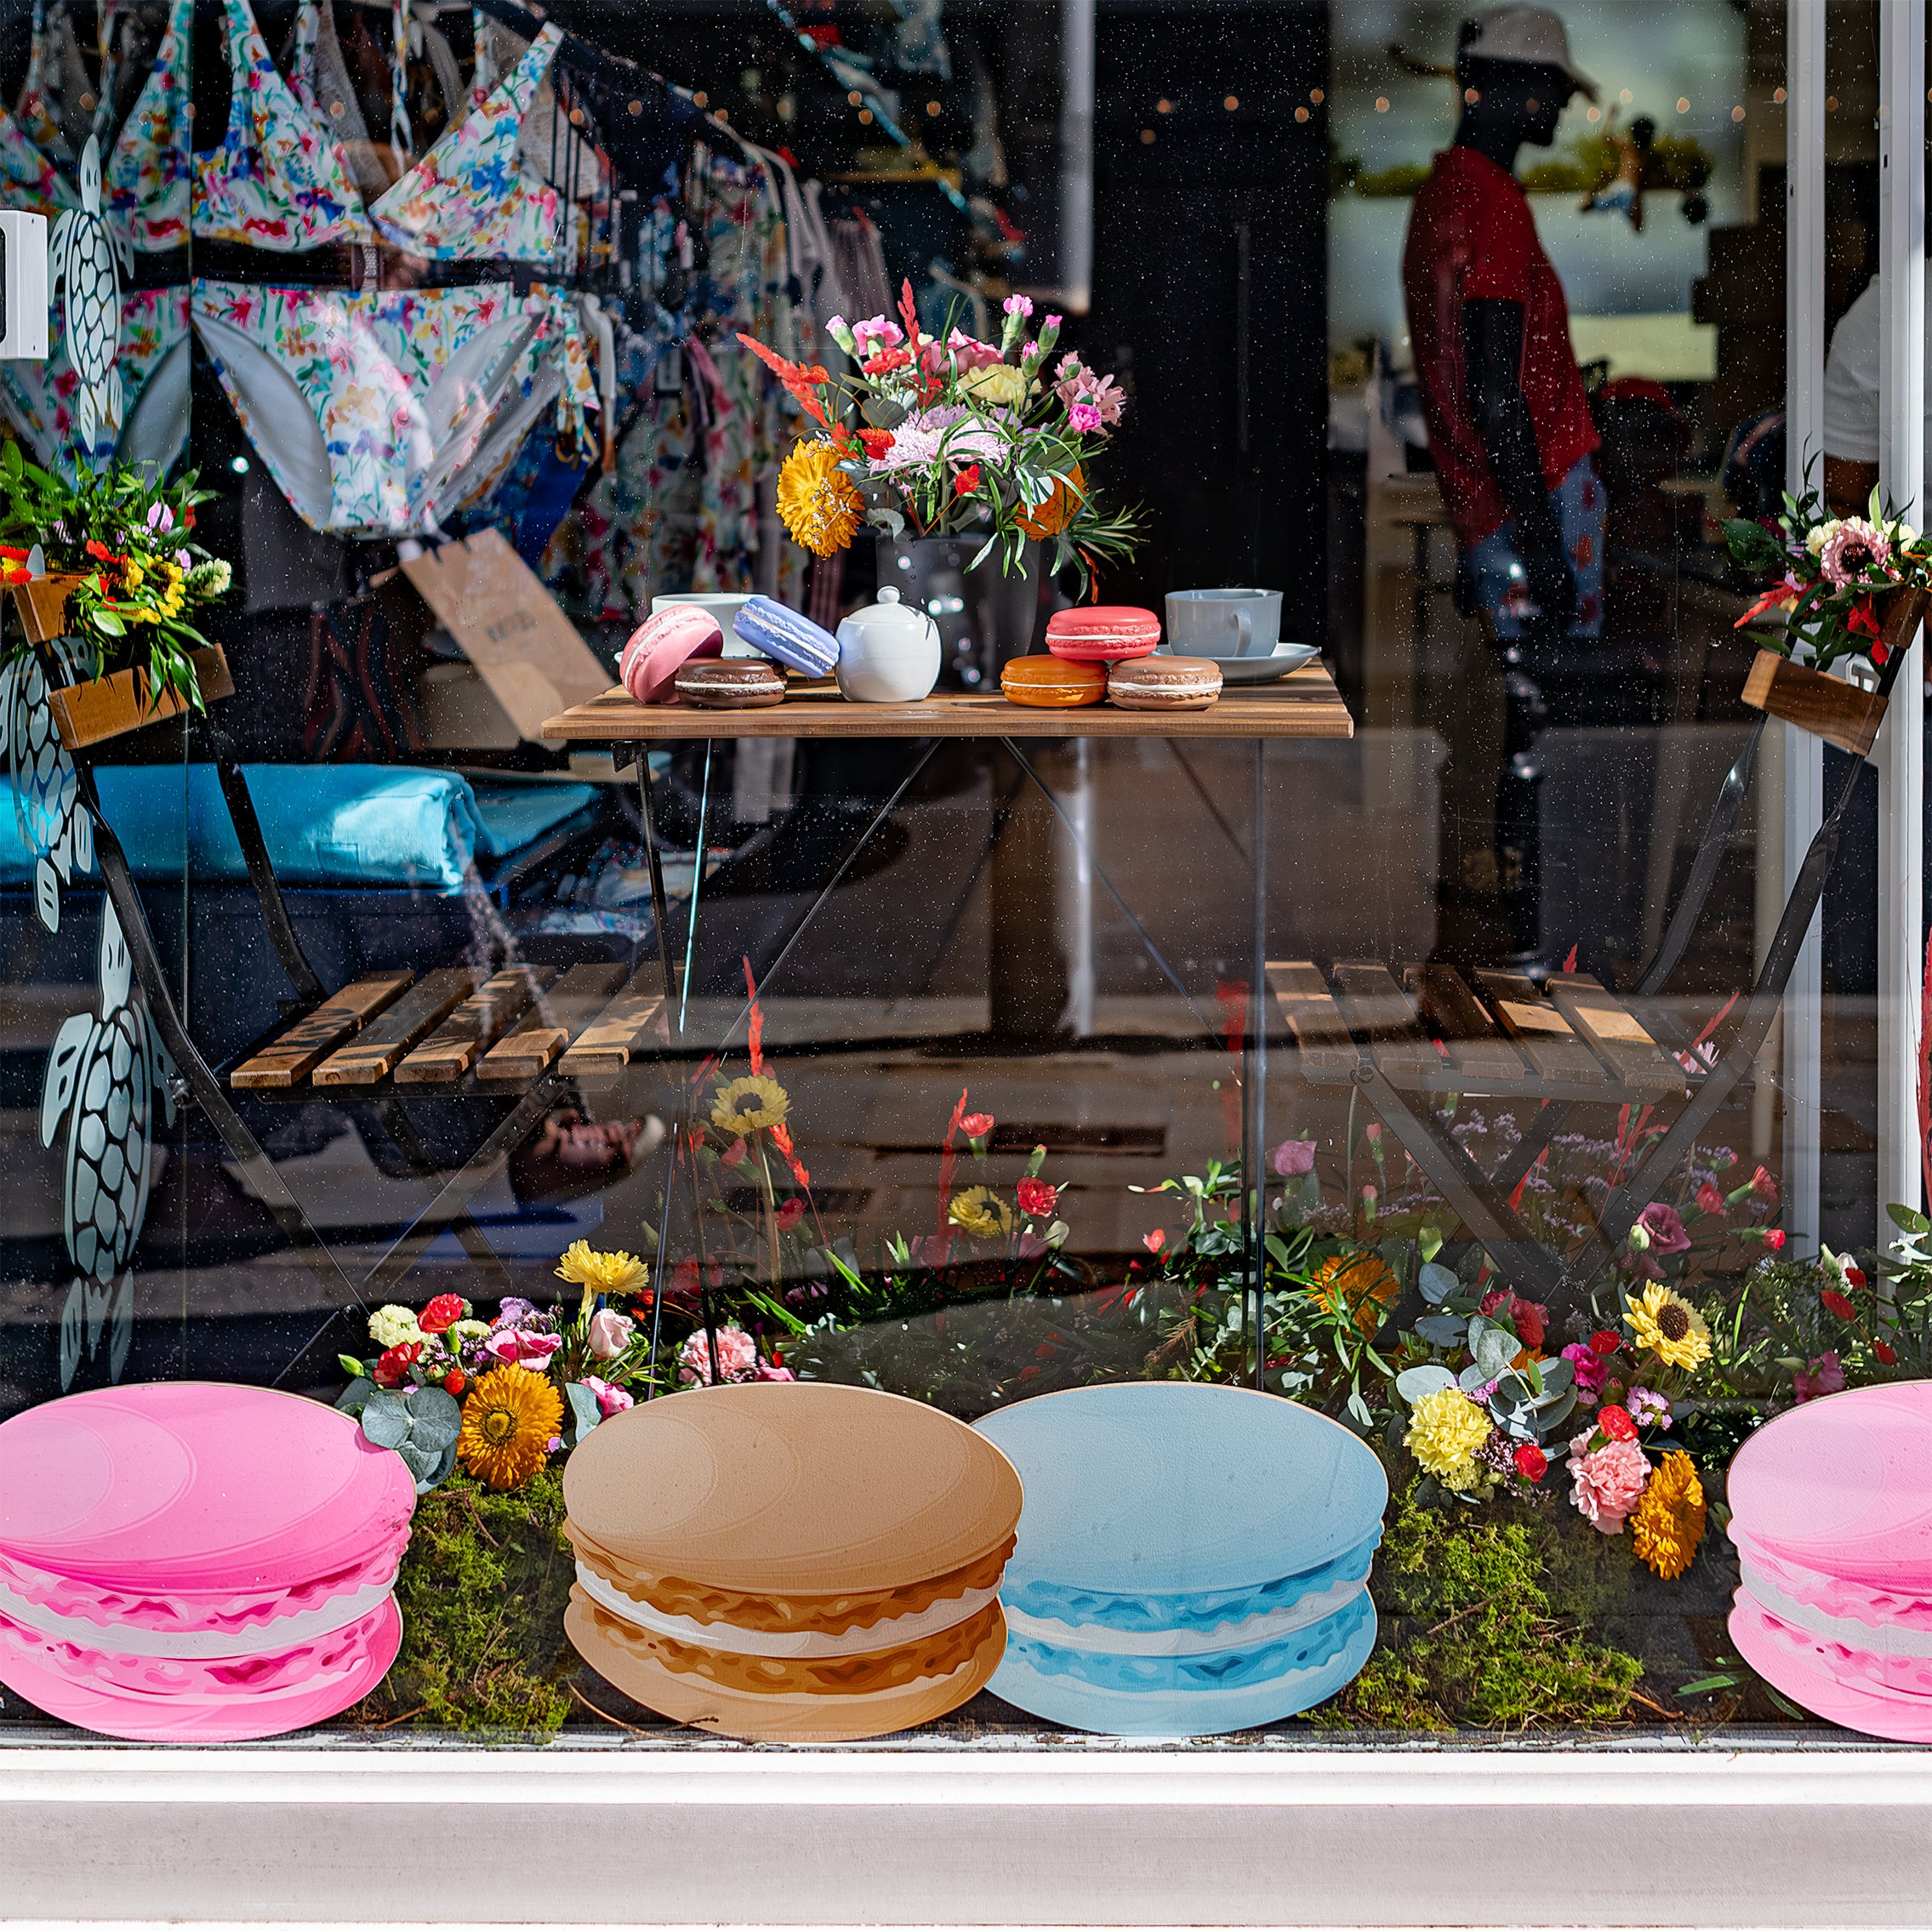 Vilebrequin store window decorated for Chelsea in Bloom with a charming bouquet of flowers designed by Amaranté London, featuring colourful flowers and a table with macarons, highlighting the vibrant atmosphere of the event.